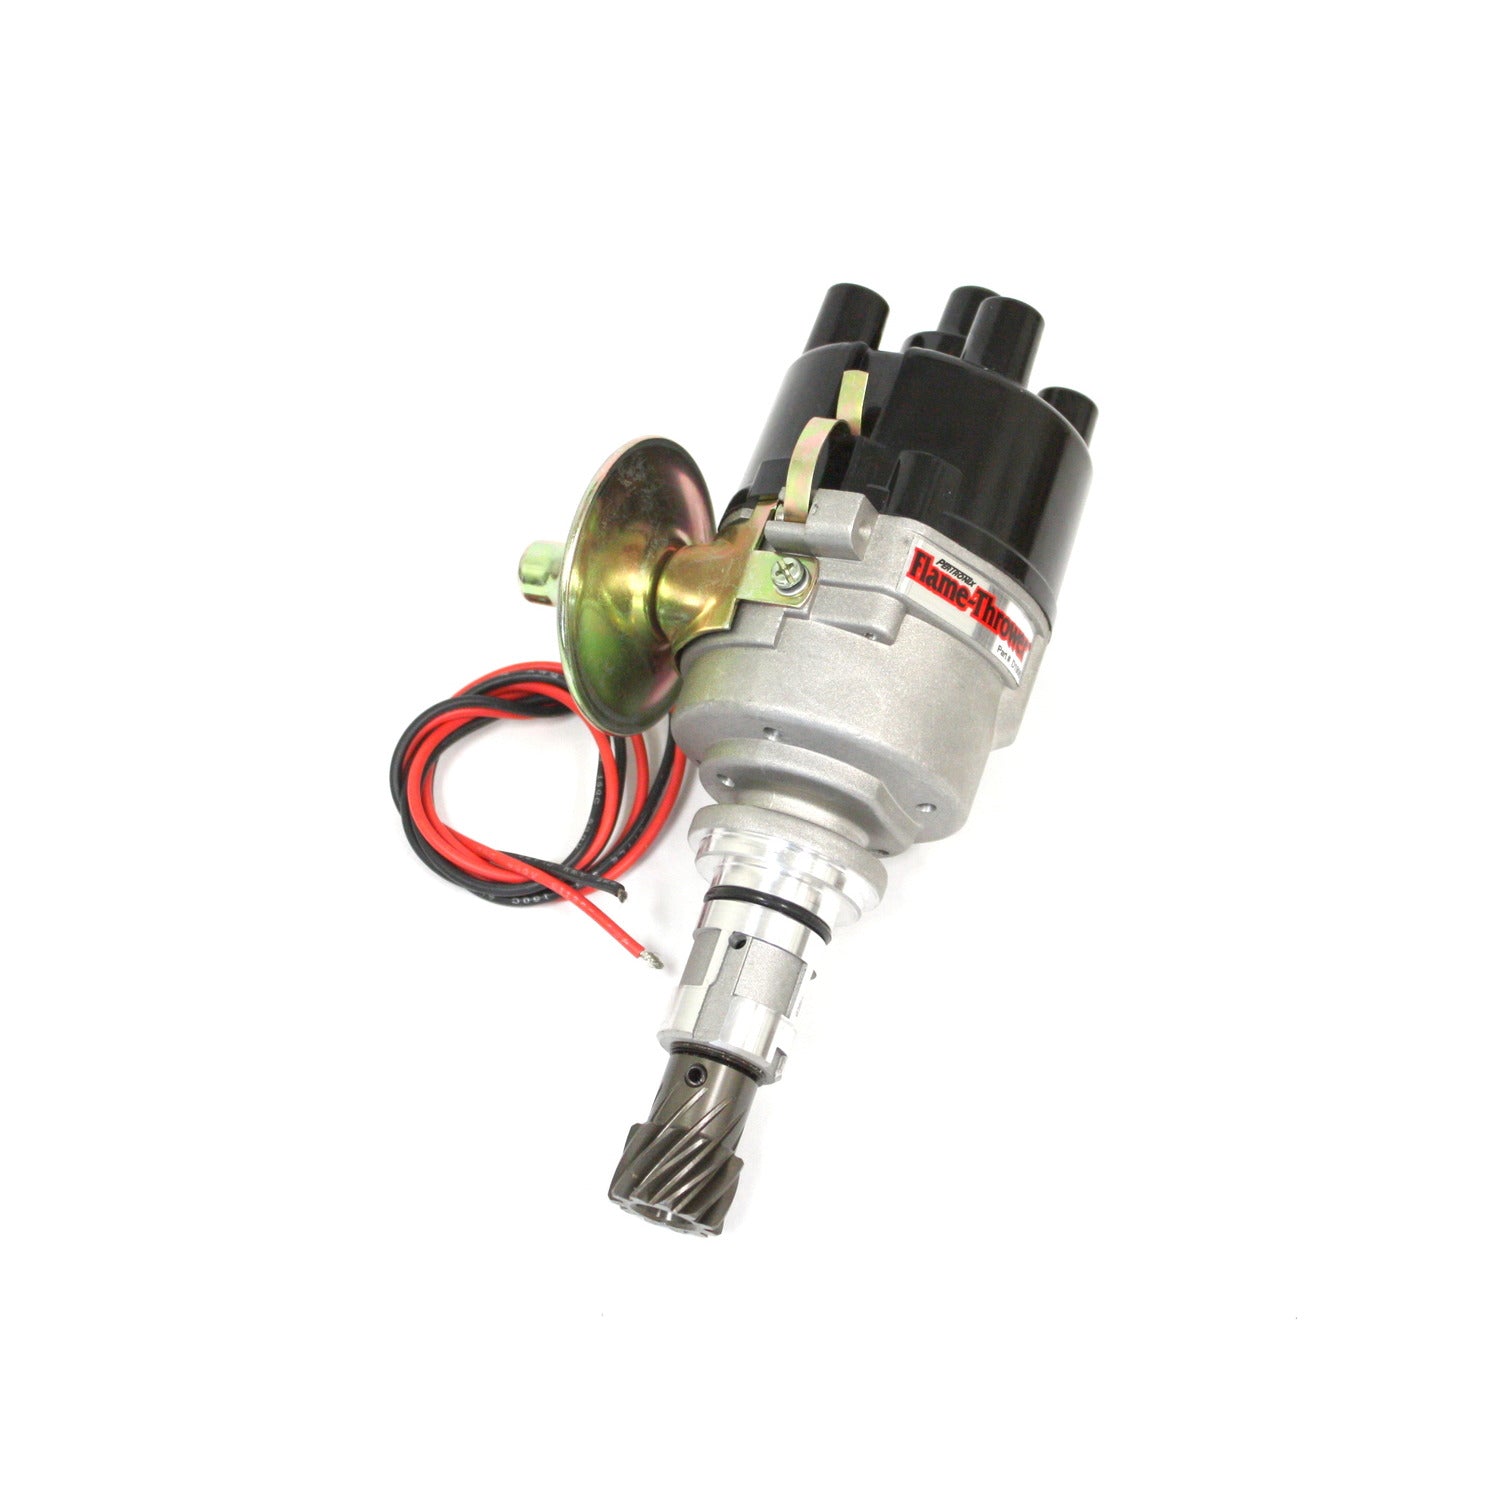 PerTronix D190600 Flame-Thrower Electronic Distributor Cast Ford X-Flow 4 cyl Plug and Play with Ignitor II Technology Vacuum Advance Top Exit Cap